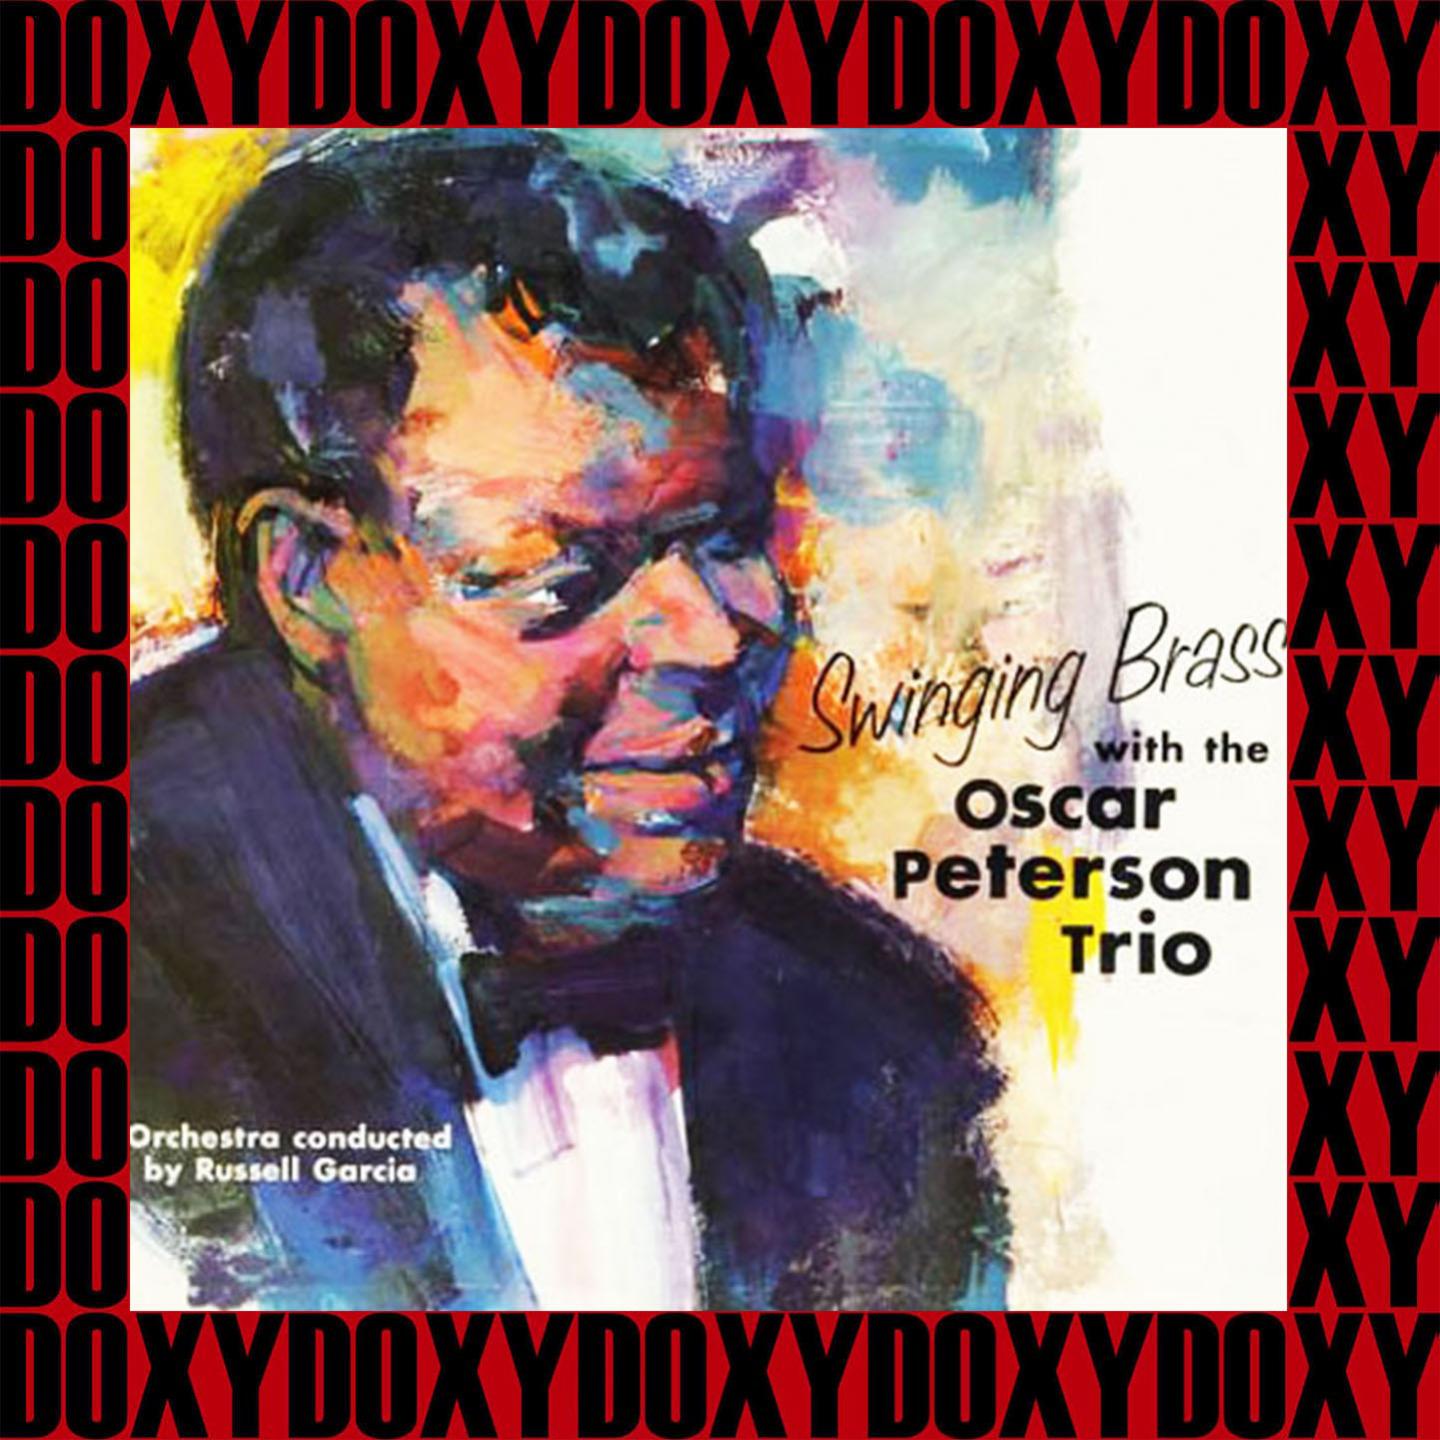 Swinging Brass with The Oscar Peterson Trio (Expanded, Remastered Version) (Doxy Collection)